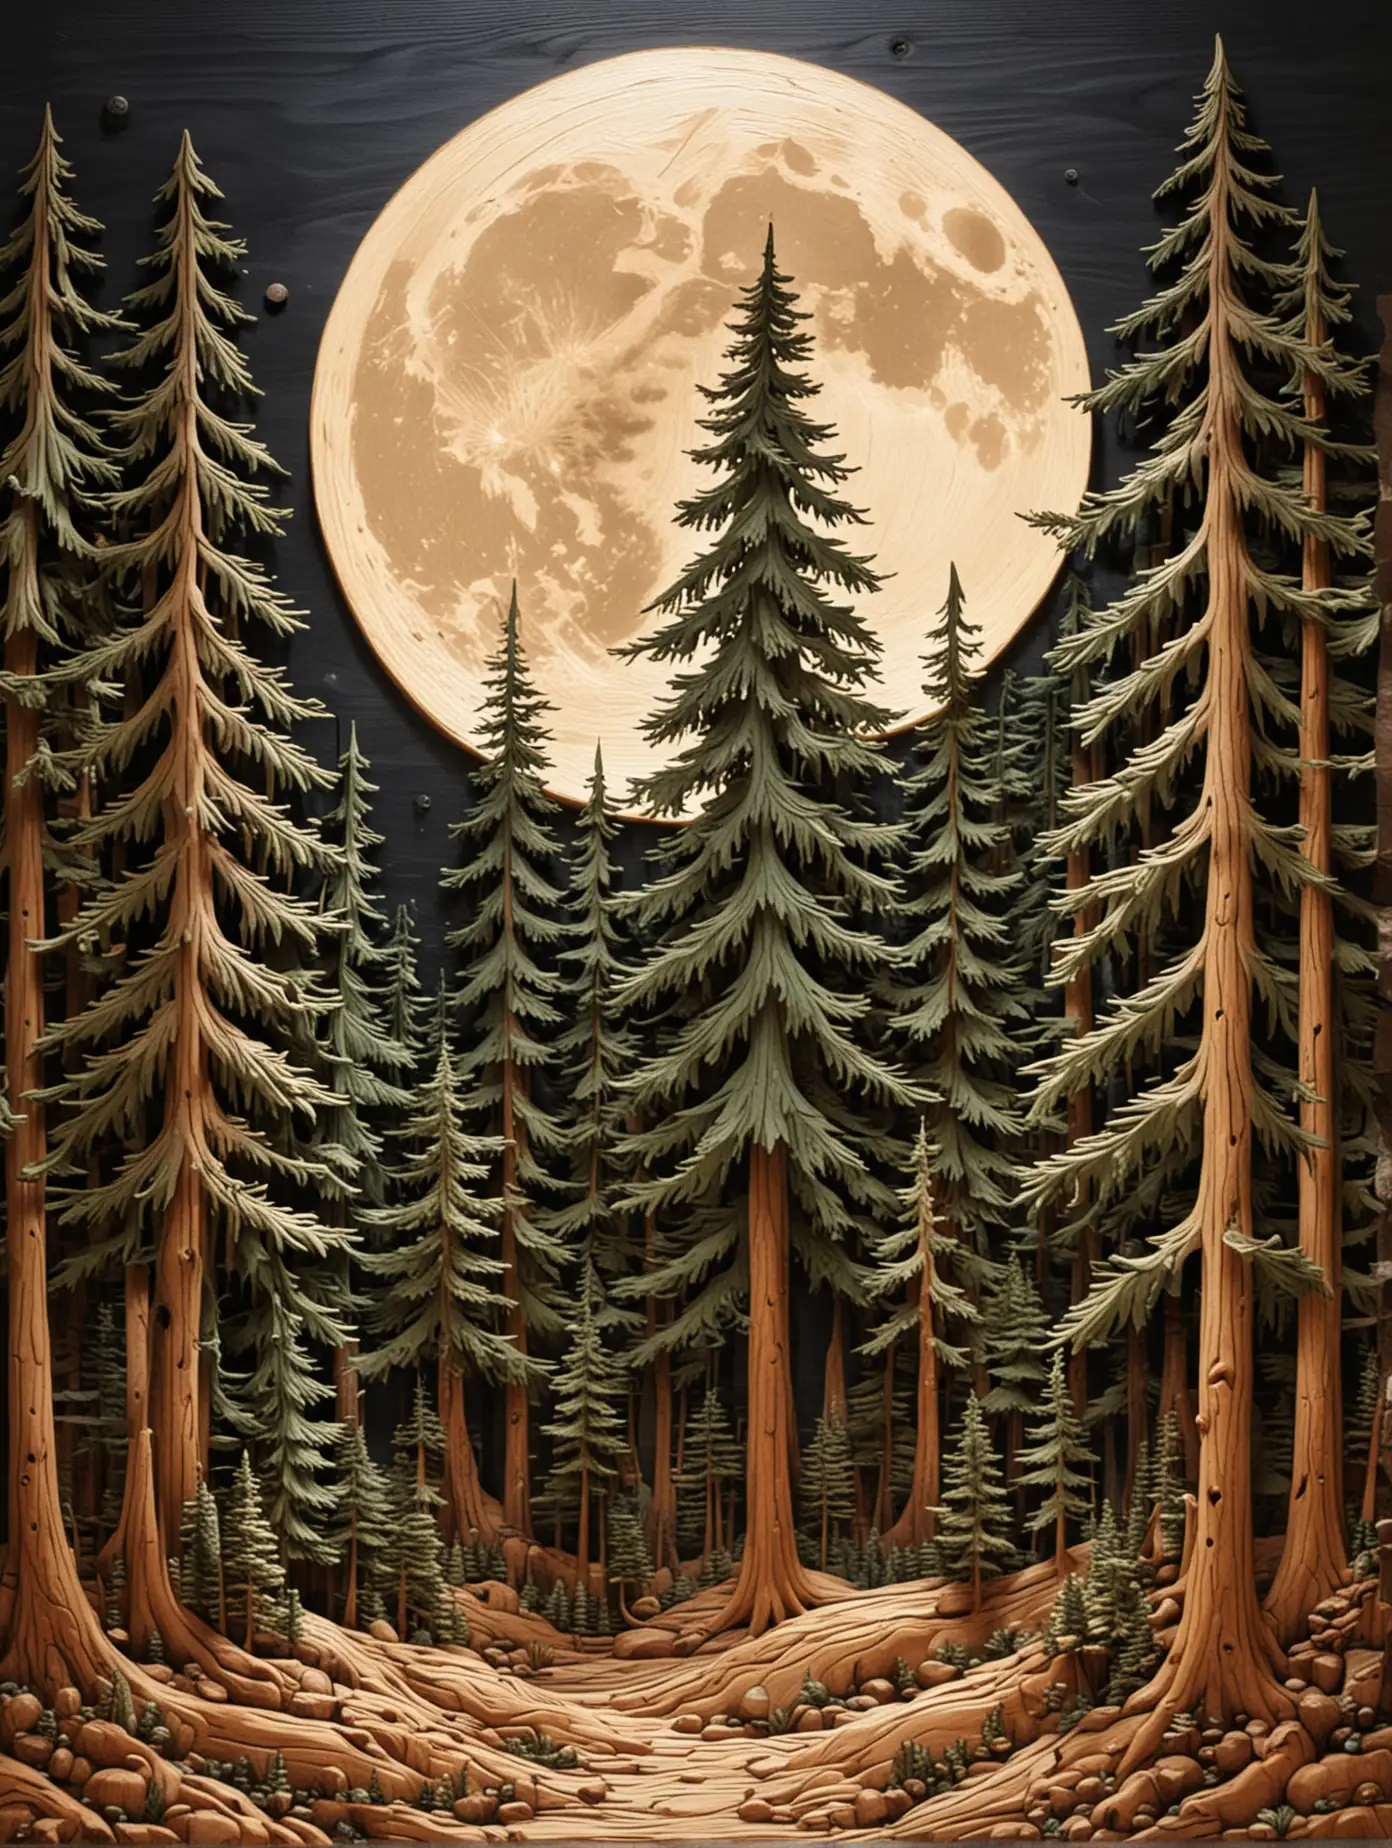  evergreen 
trees differnt sizes,, carved in wood , 2d relief,  full moon